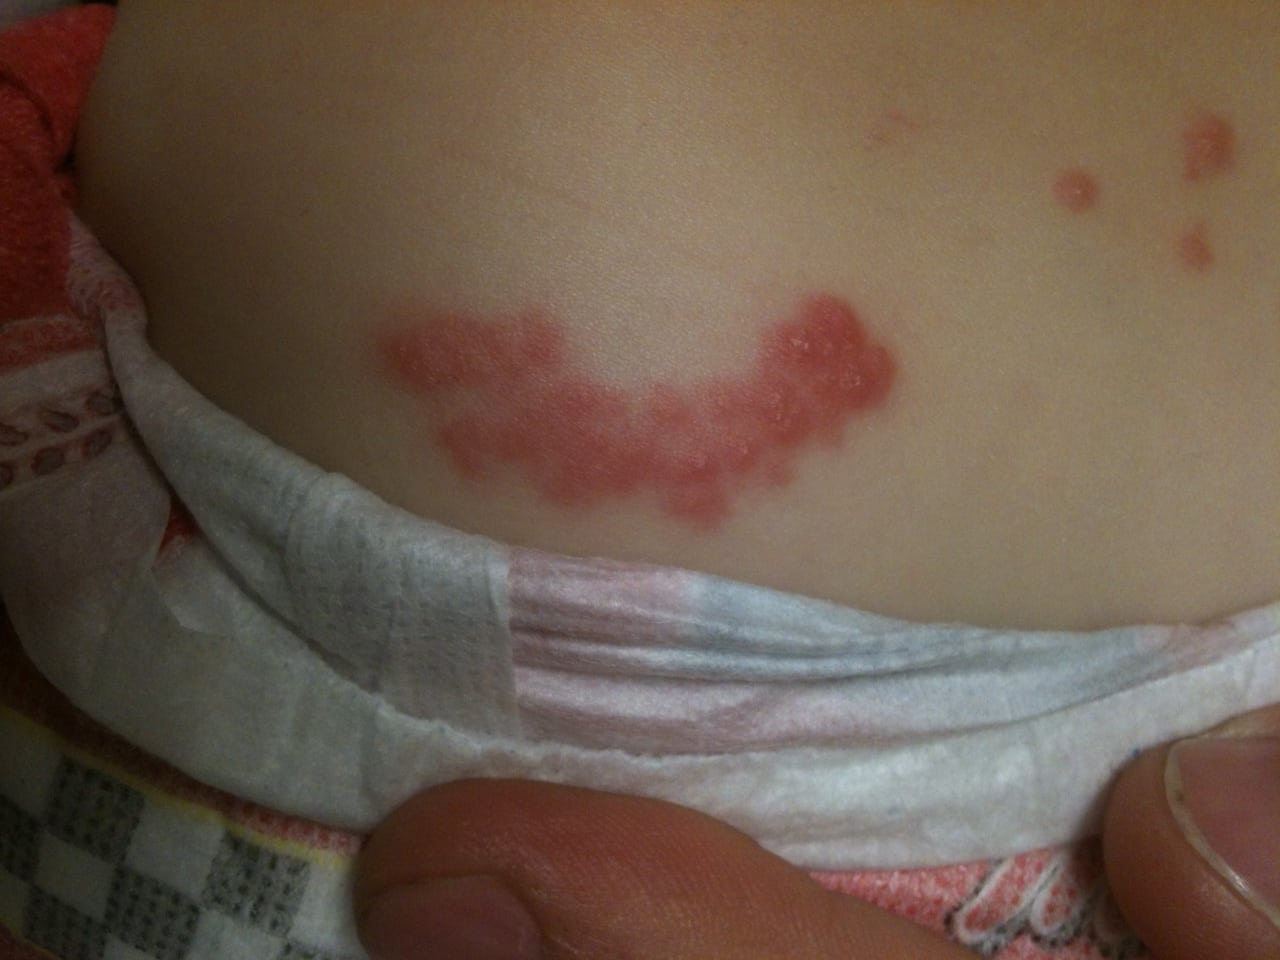 Figure 1 Classic dermatomal distribution of vesicular rash extending from the left lumbar back to the left anterolateral thigh.